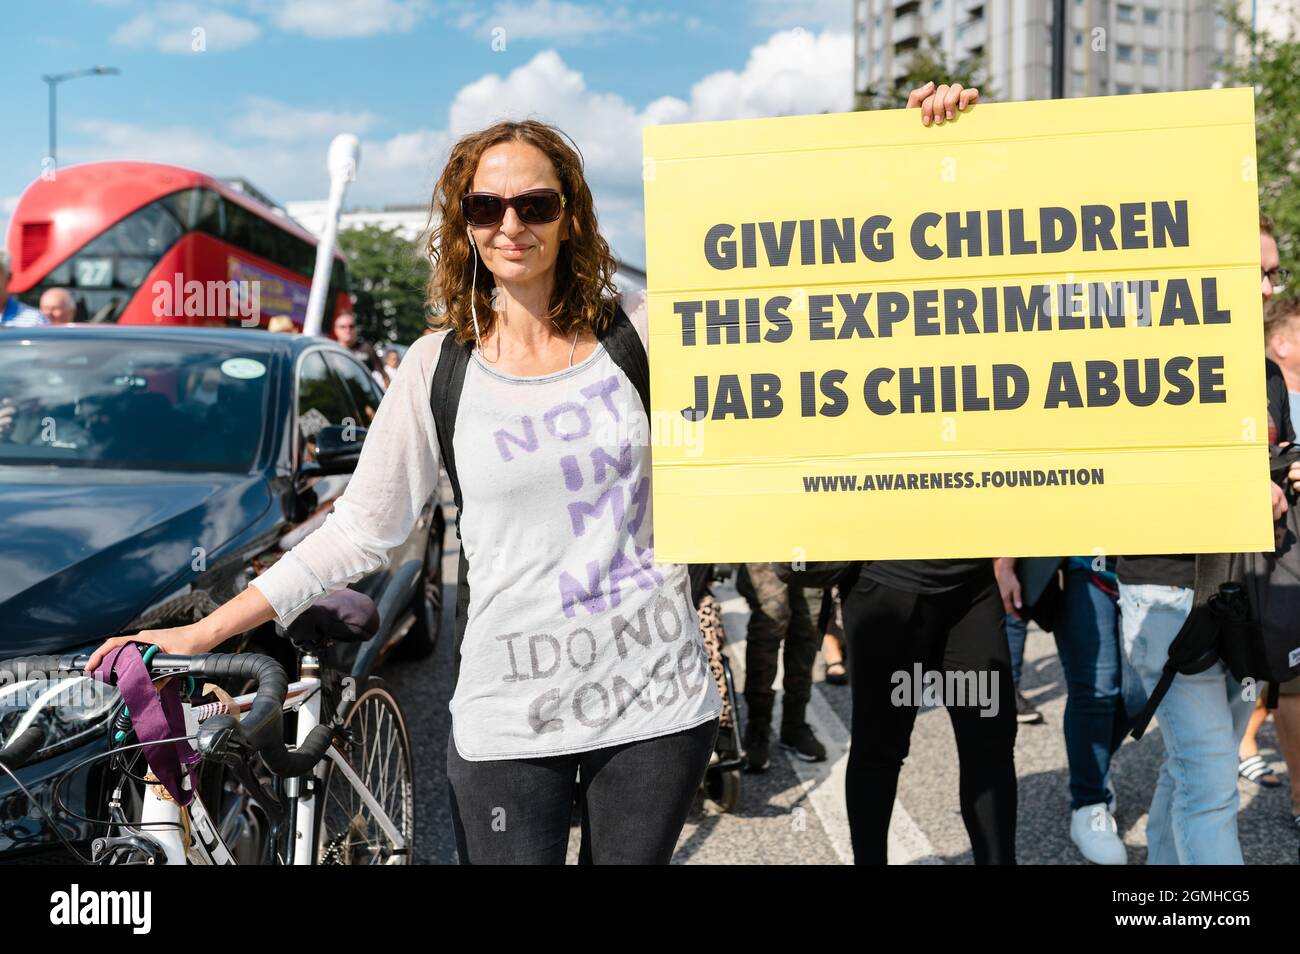 London, UK. 18 September 2021. Anti-vaccine protesters march for 'World Wide Rally For Freedom' against children's vaccinations and vaccine passports Stock Photo